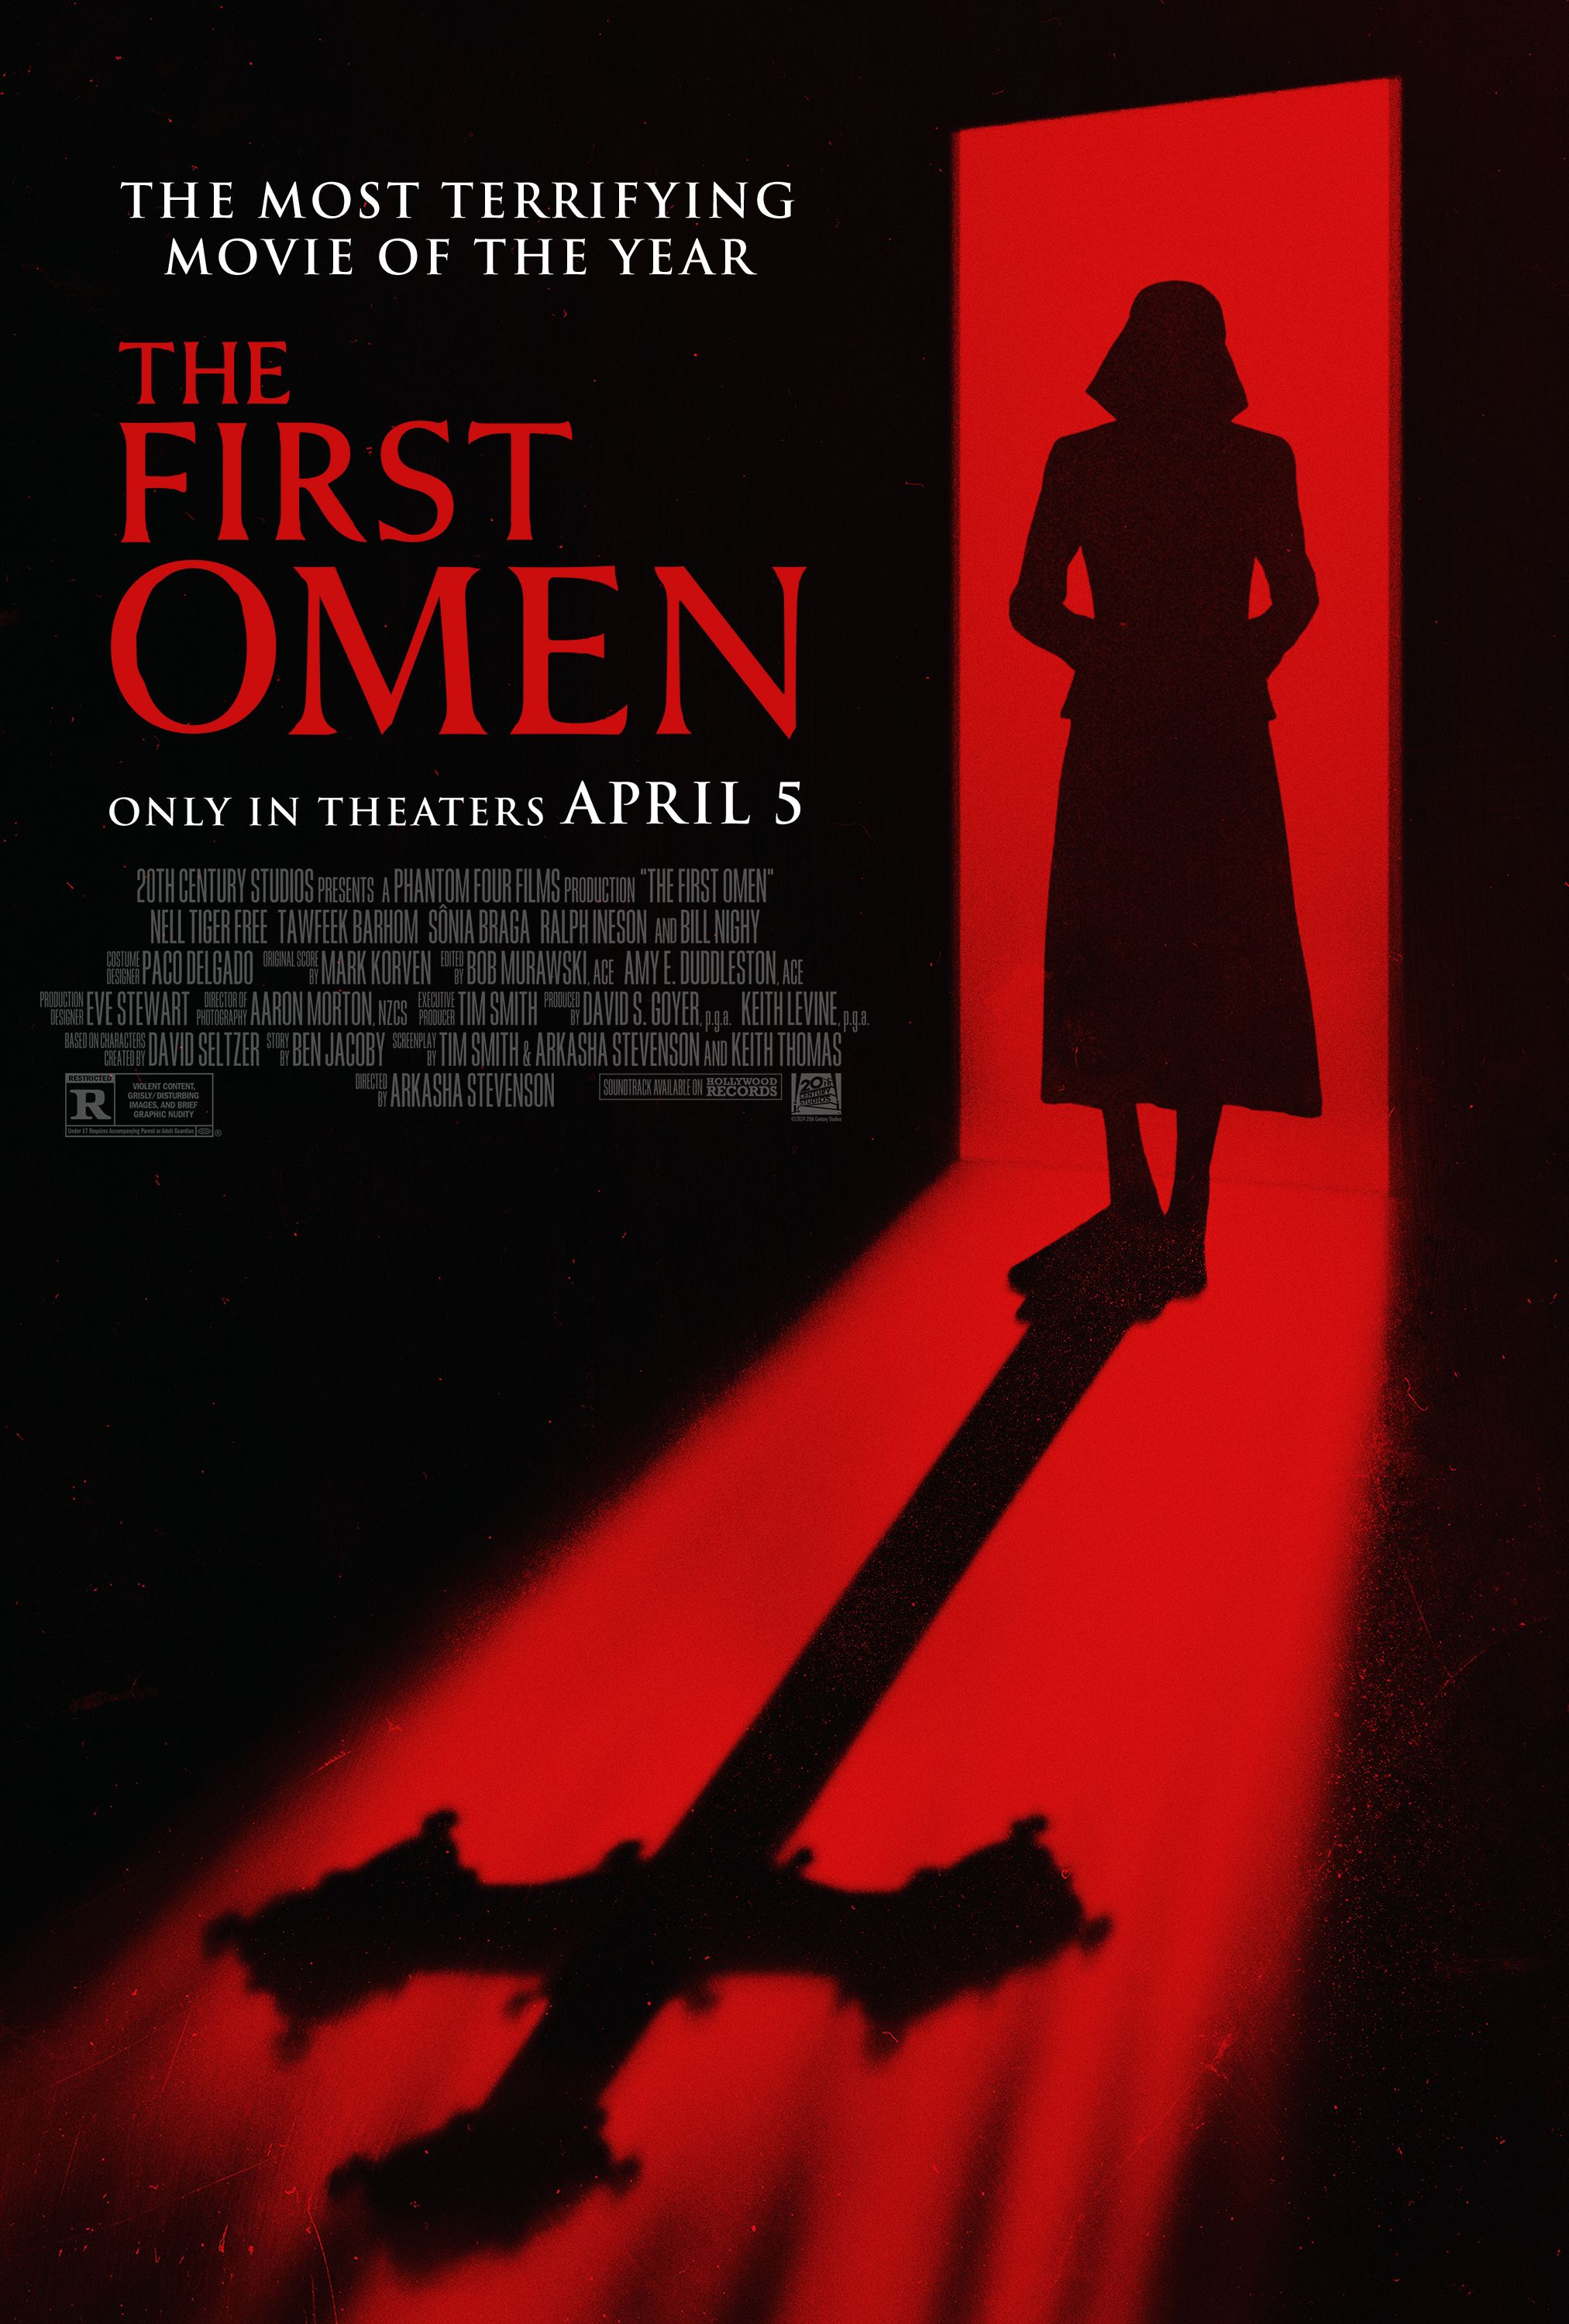 The FIrst Omen poster